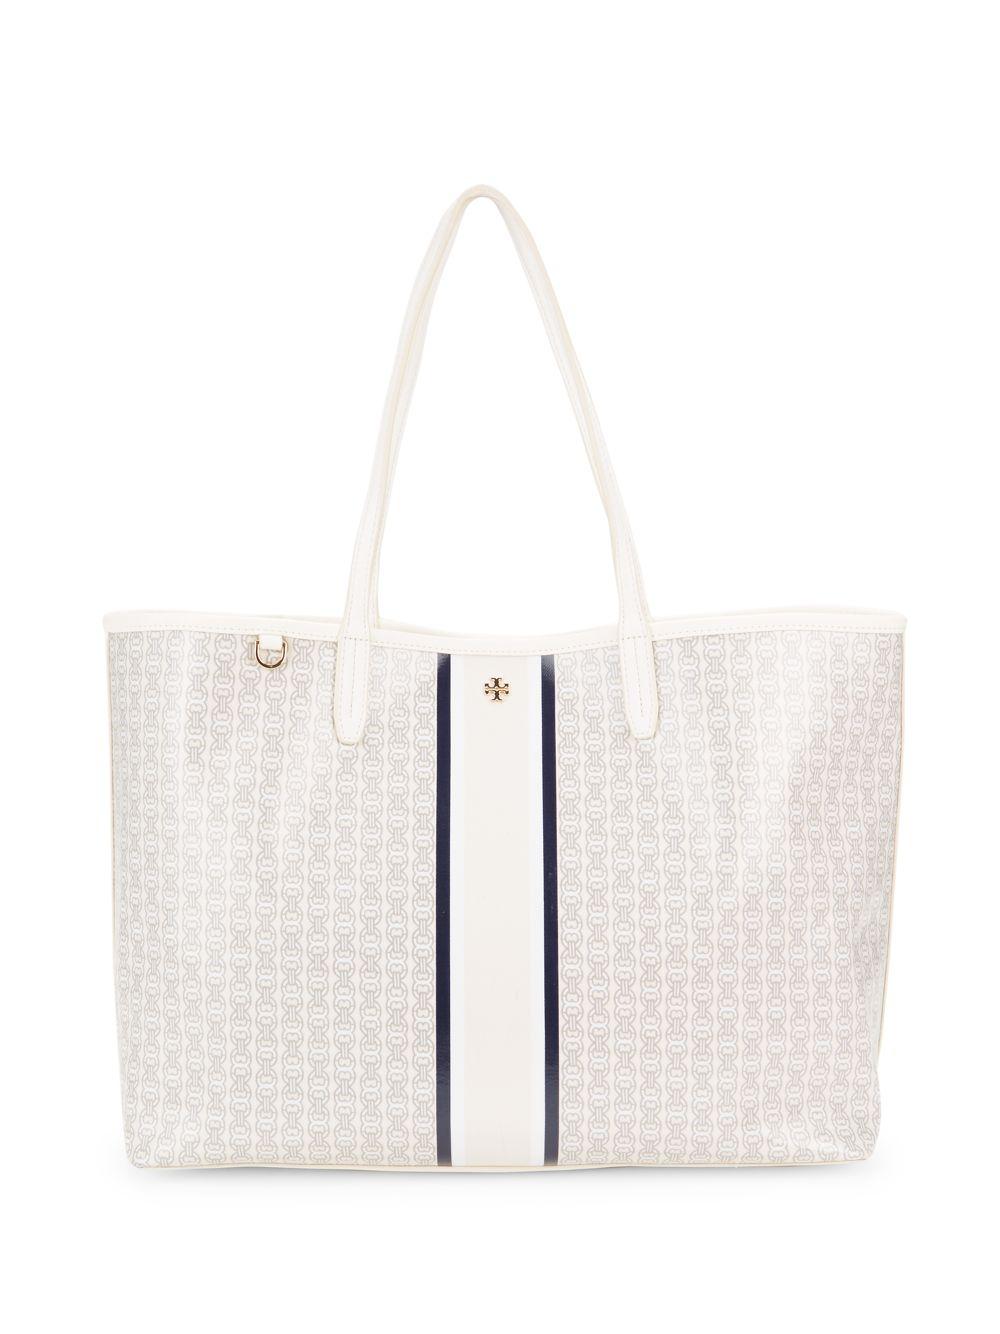 Tory Burch Gemini Link Coated Canvas Tote in White | Lyst